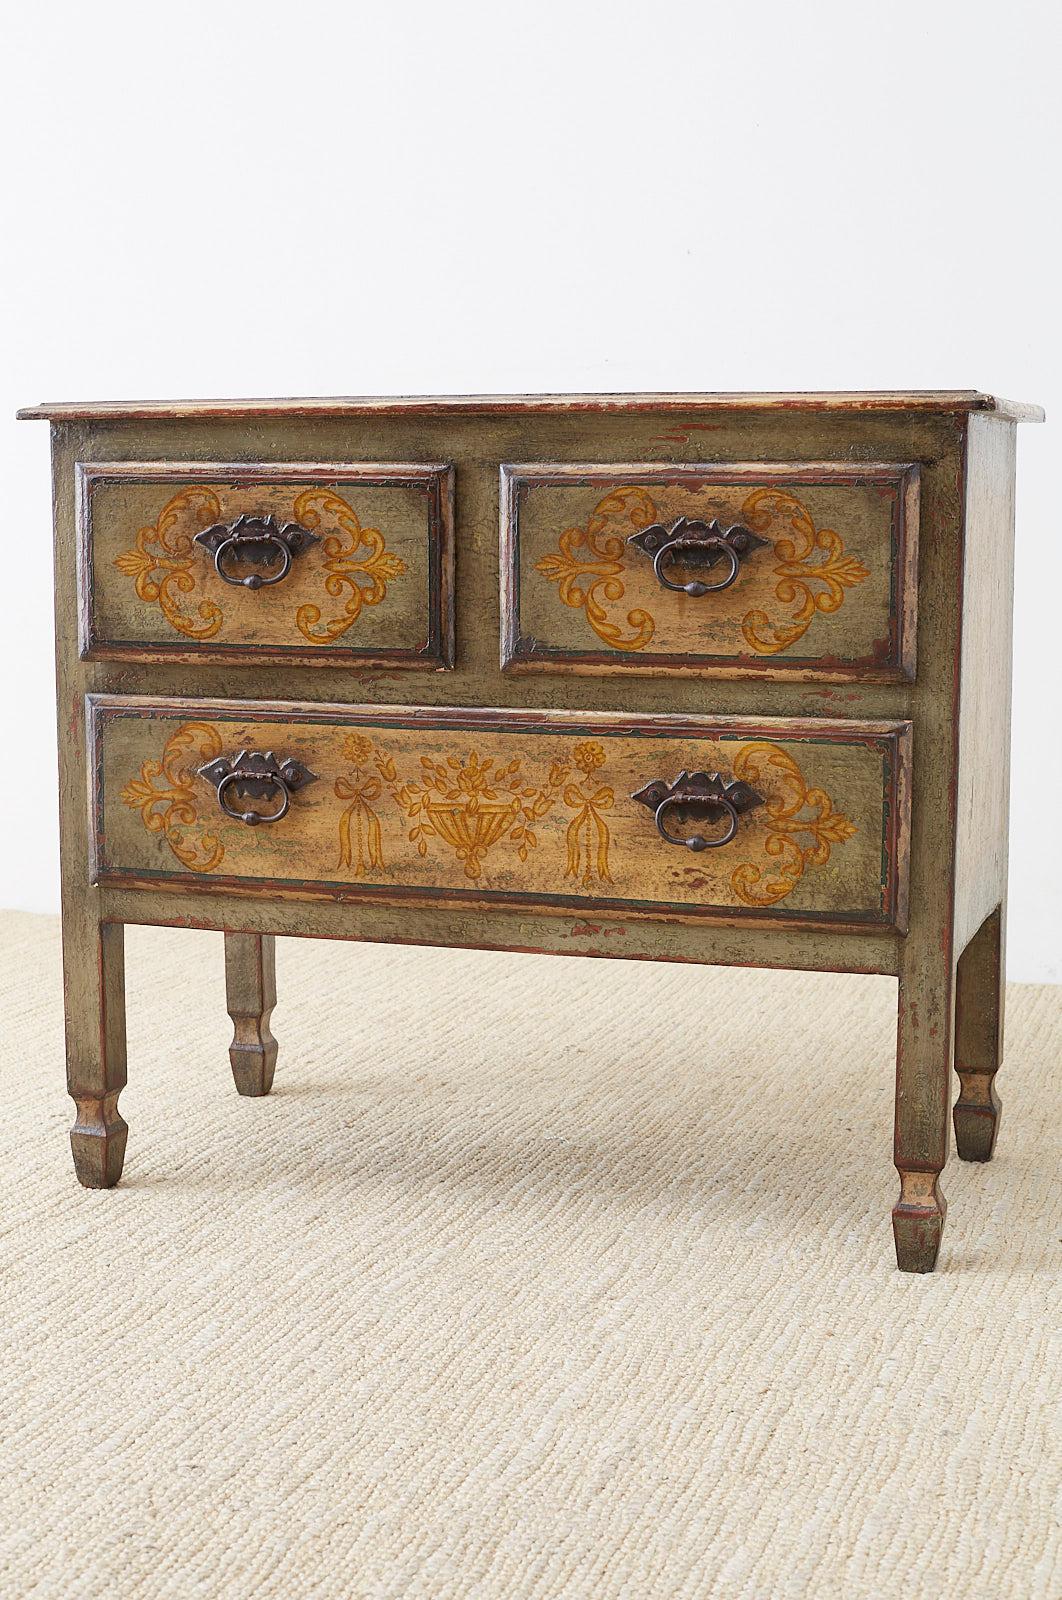 Venetian Style Painted Three-Drawer Commode or Chest (Neoklassisch)